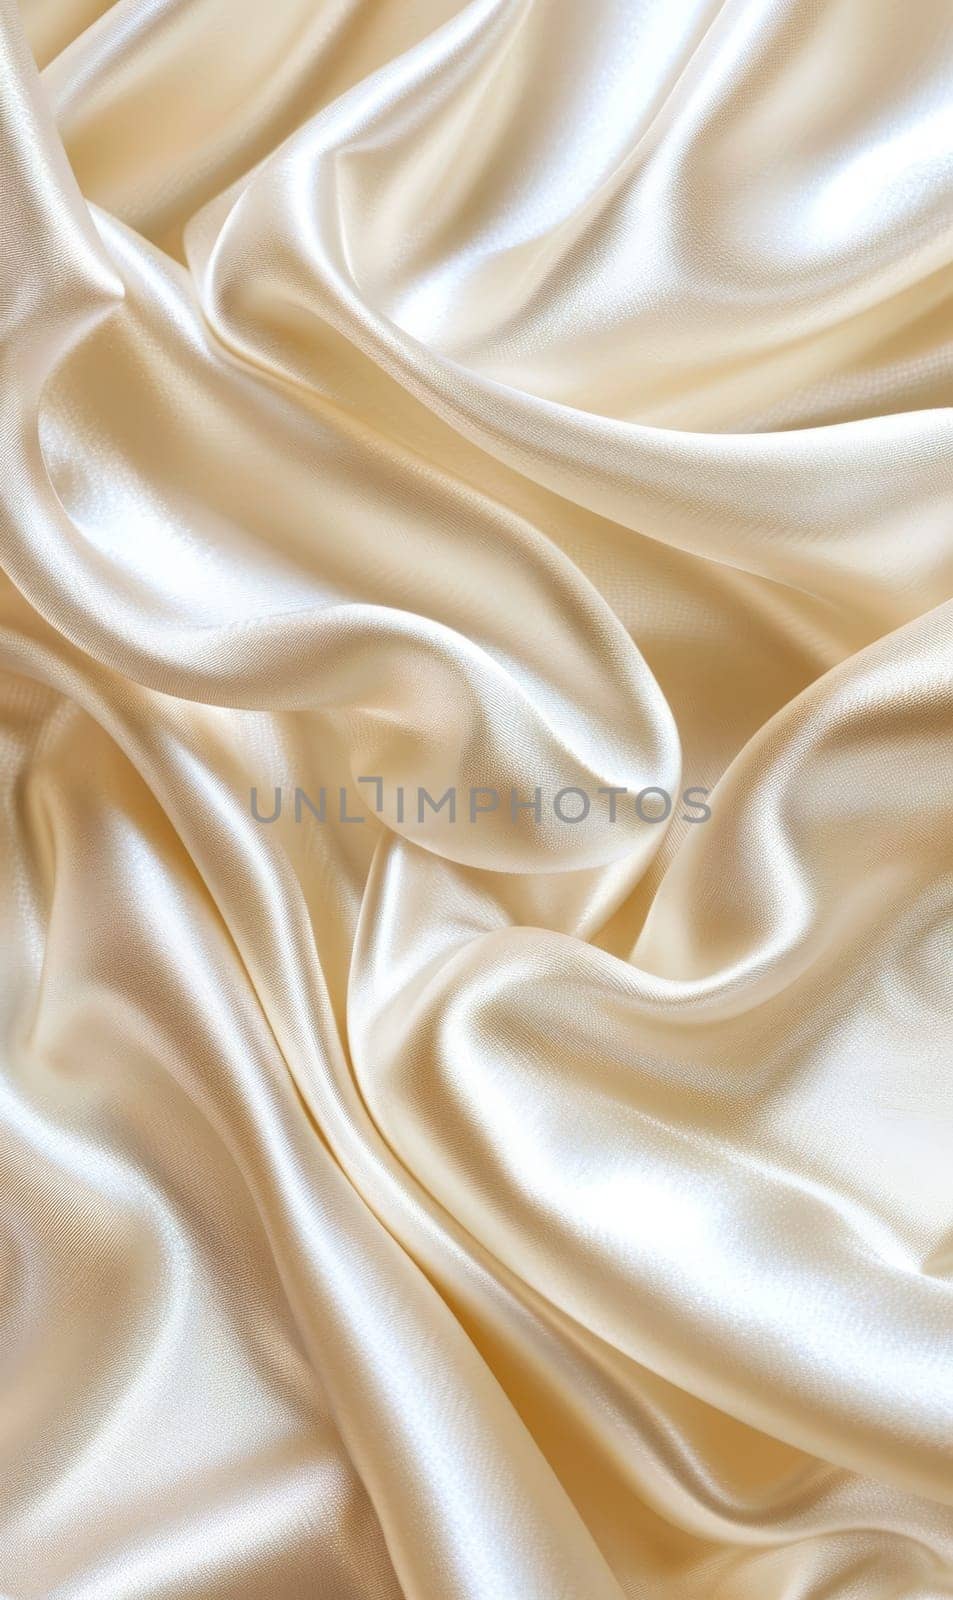 Elegant waves of high-quality cream silk fabric with a lustrous sheen, perfect for backgrounds or luxury design themes. by sfinks